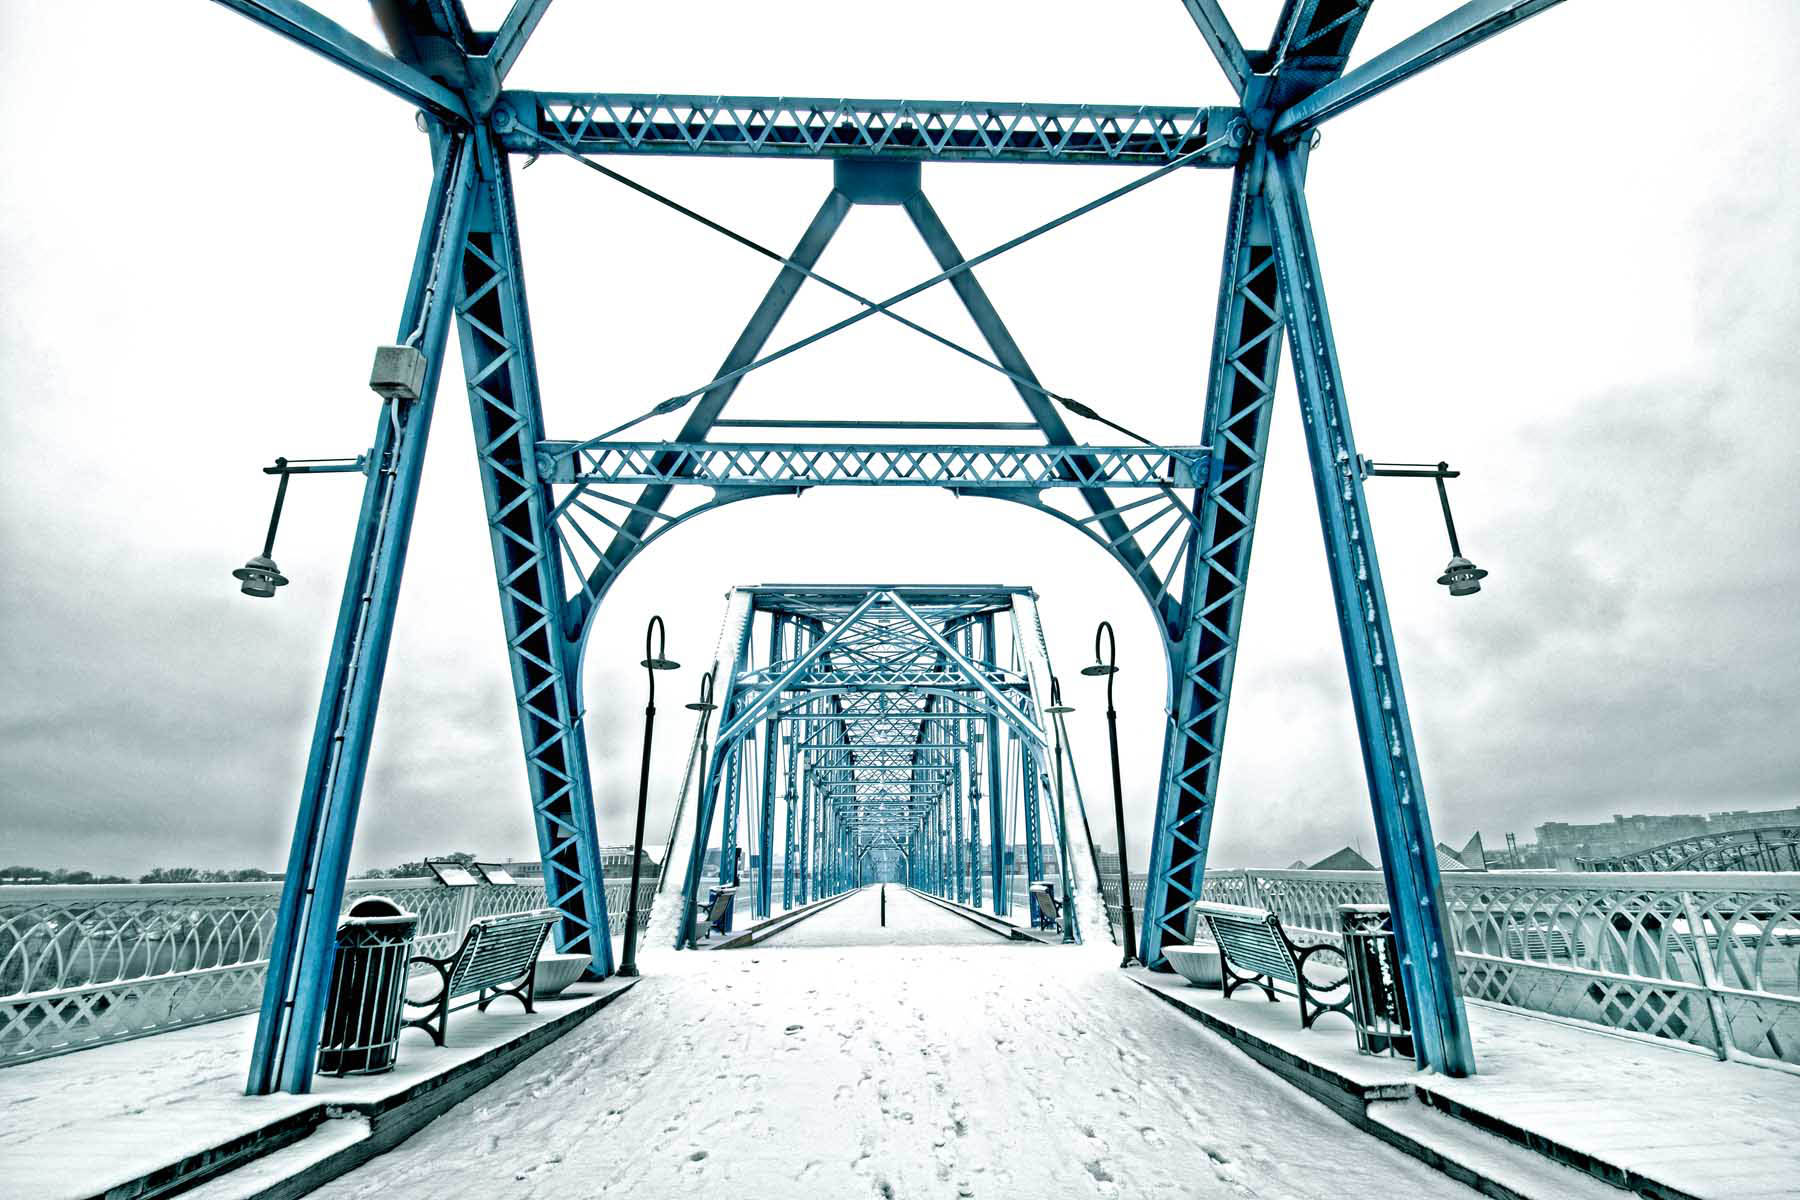 Walnut St. Bridge in snow Downtown Chattanooga Art Prints for Sale 